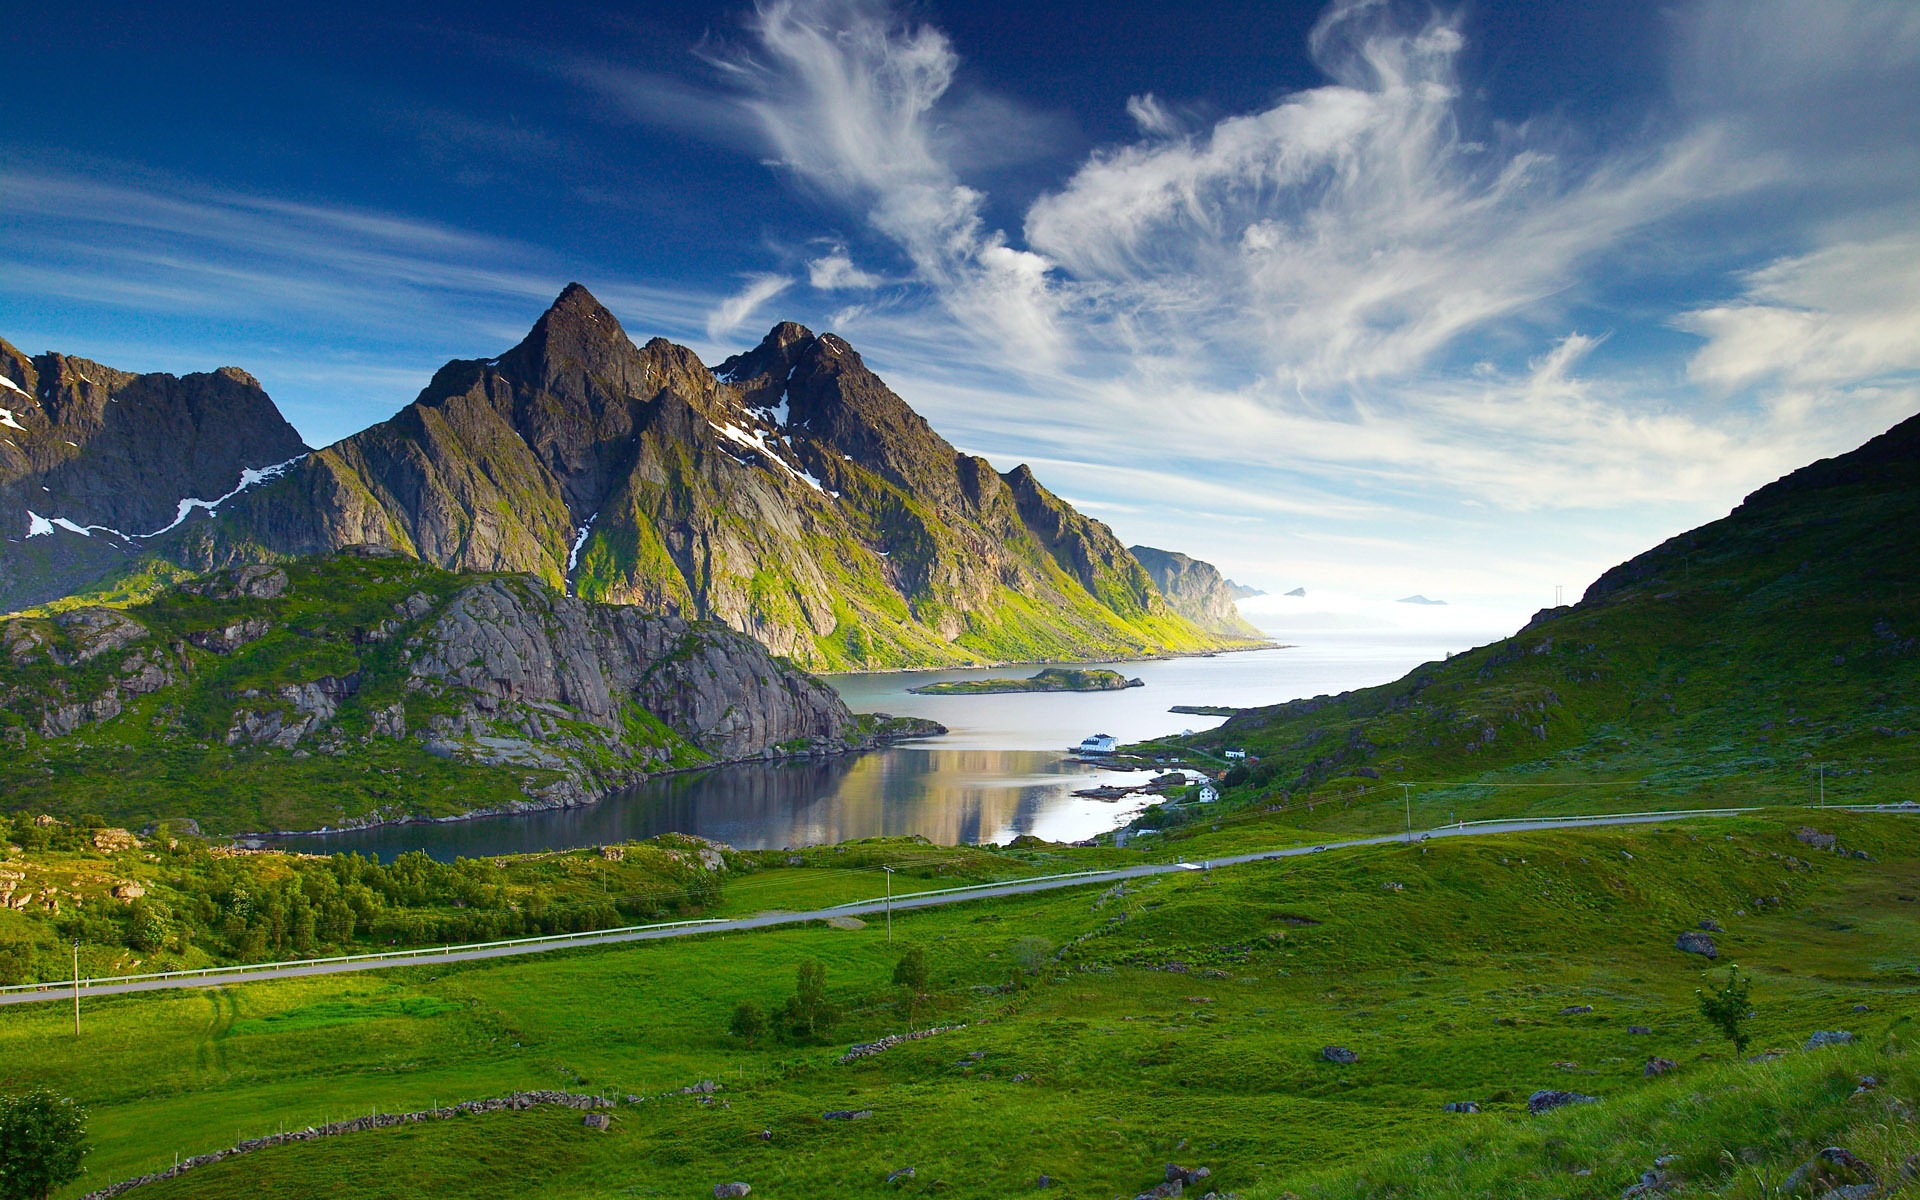 Windows 7 Wallpapers: Nordic Landscapes #1 - 1920x1200